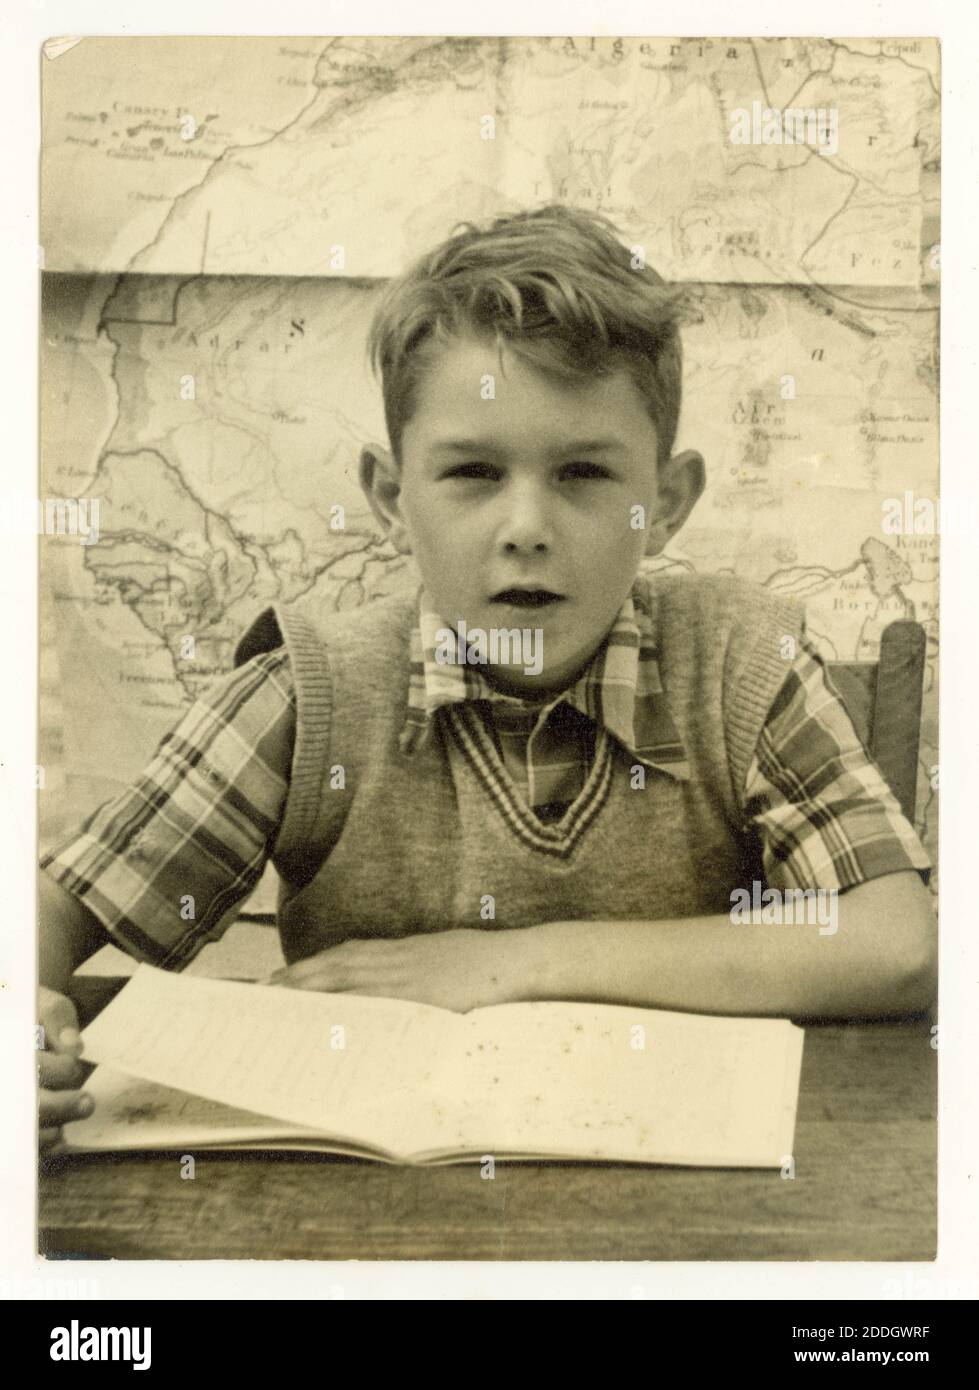 Original 1950's school photograph of school boy wearing a check shirt and tank-top sitting at a desk reading a book, map on wall behind him, U.K. Stock Photo